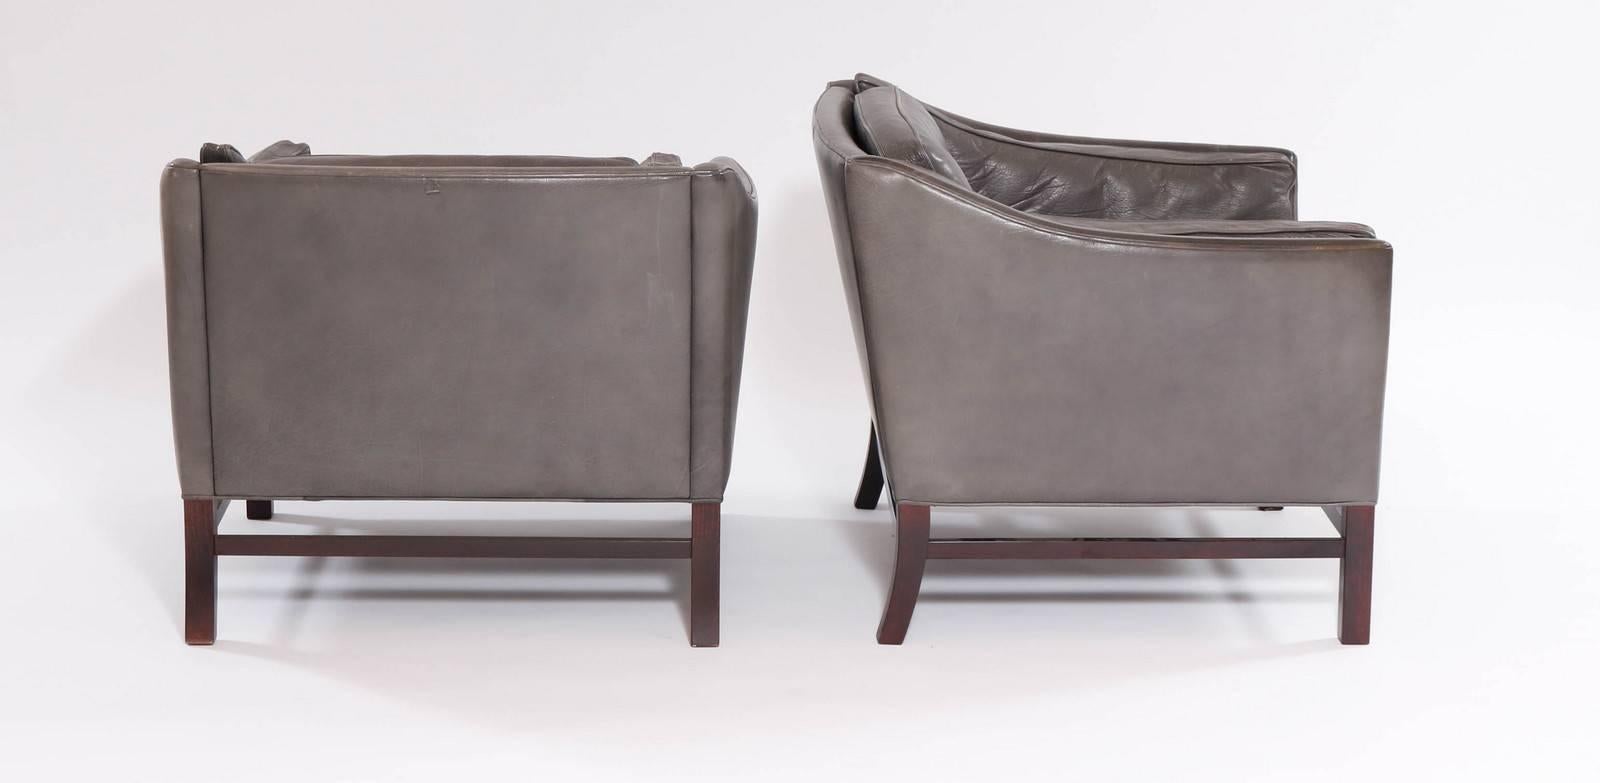 Pair of Danish 1960s club chairs of square form by Grandt. The chairs upholstered in grey leather.